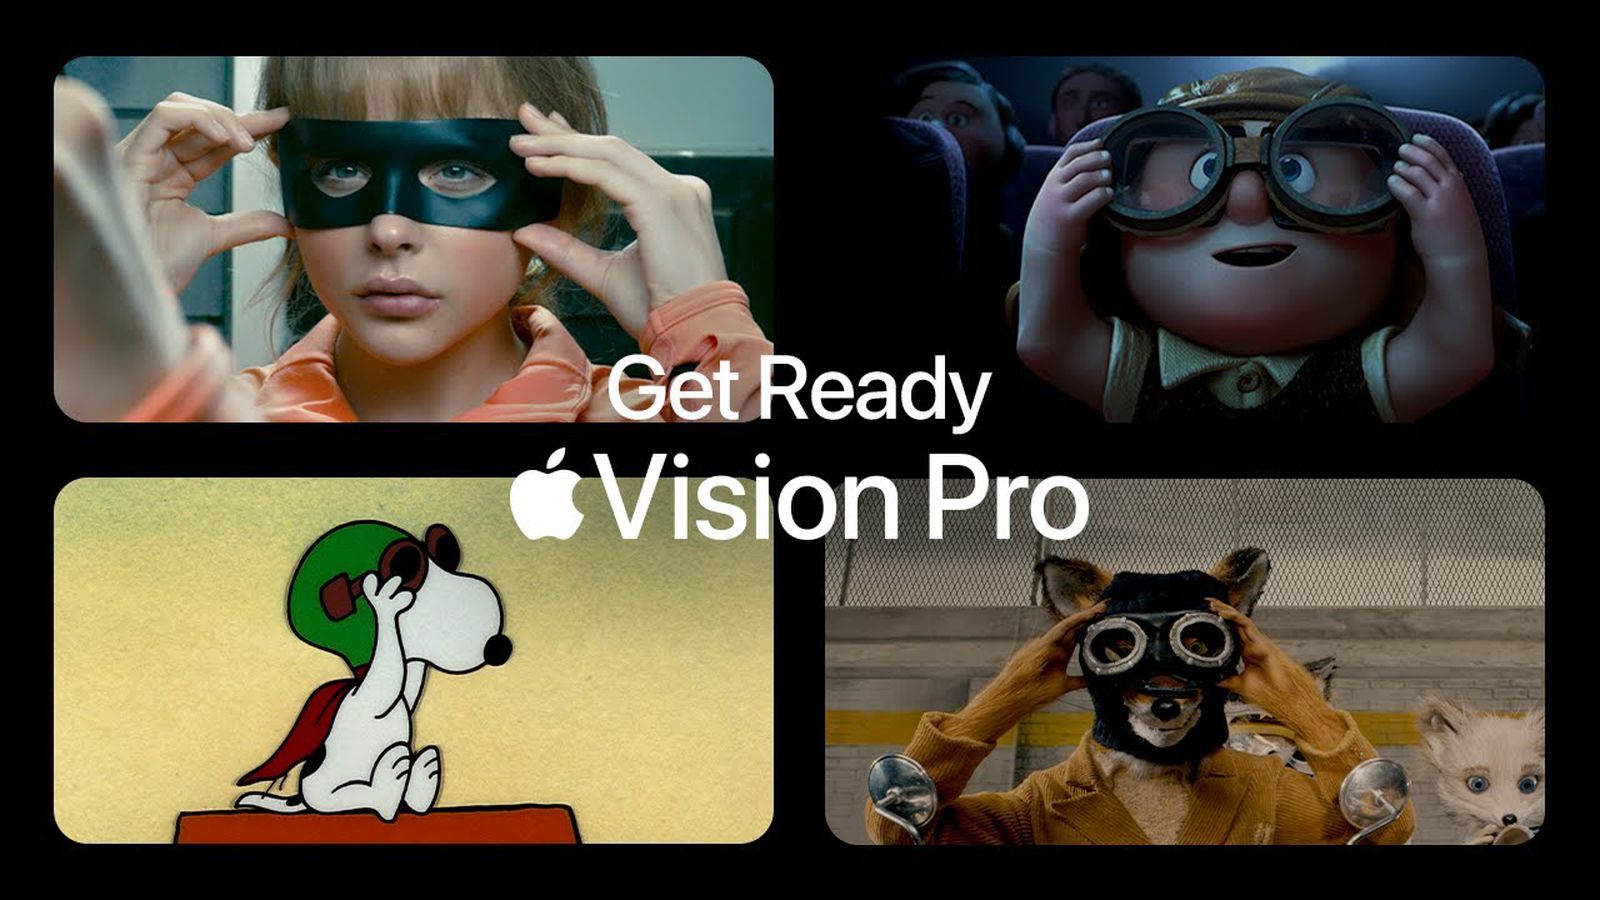 Apple shares new ‘Get Ready’ ad ahead of Vision Pro launch